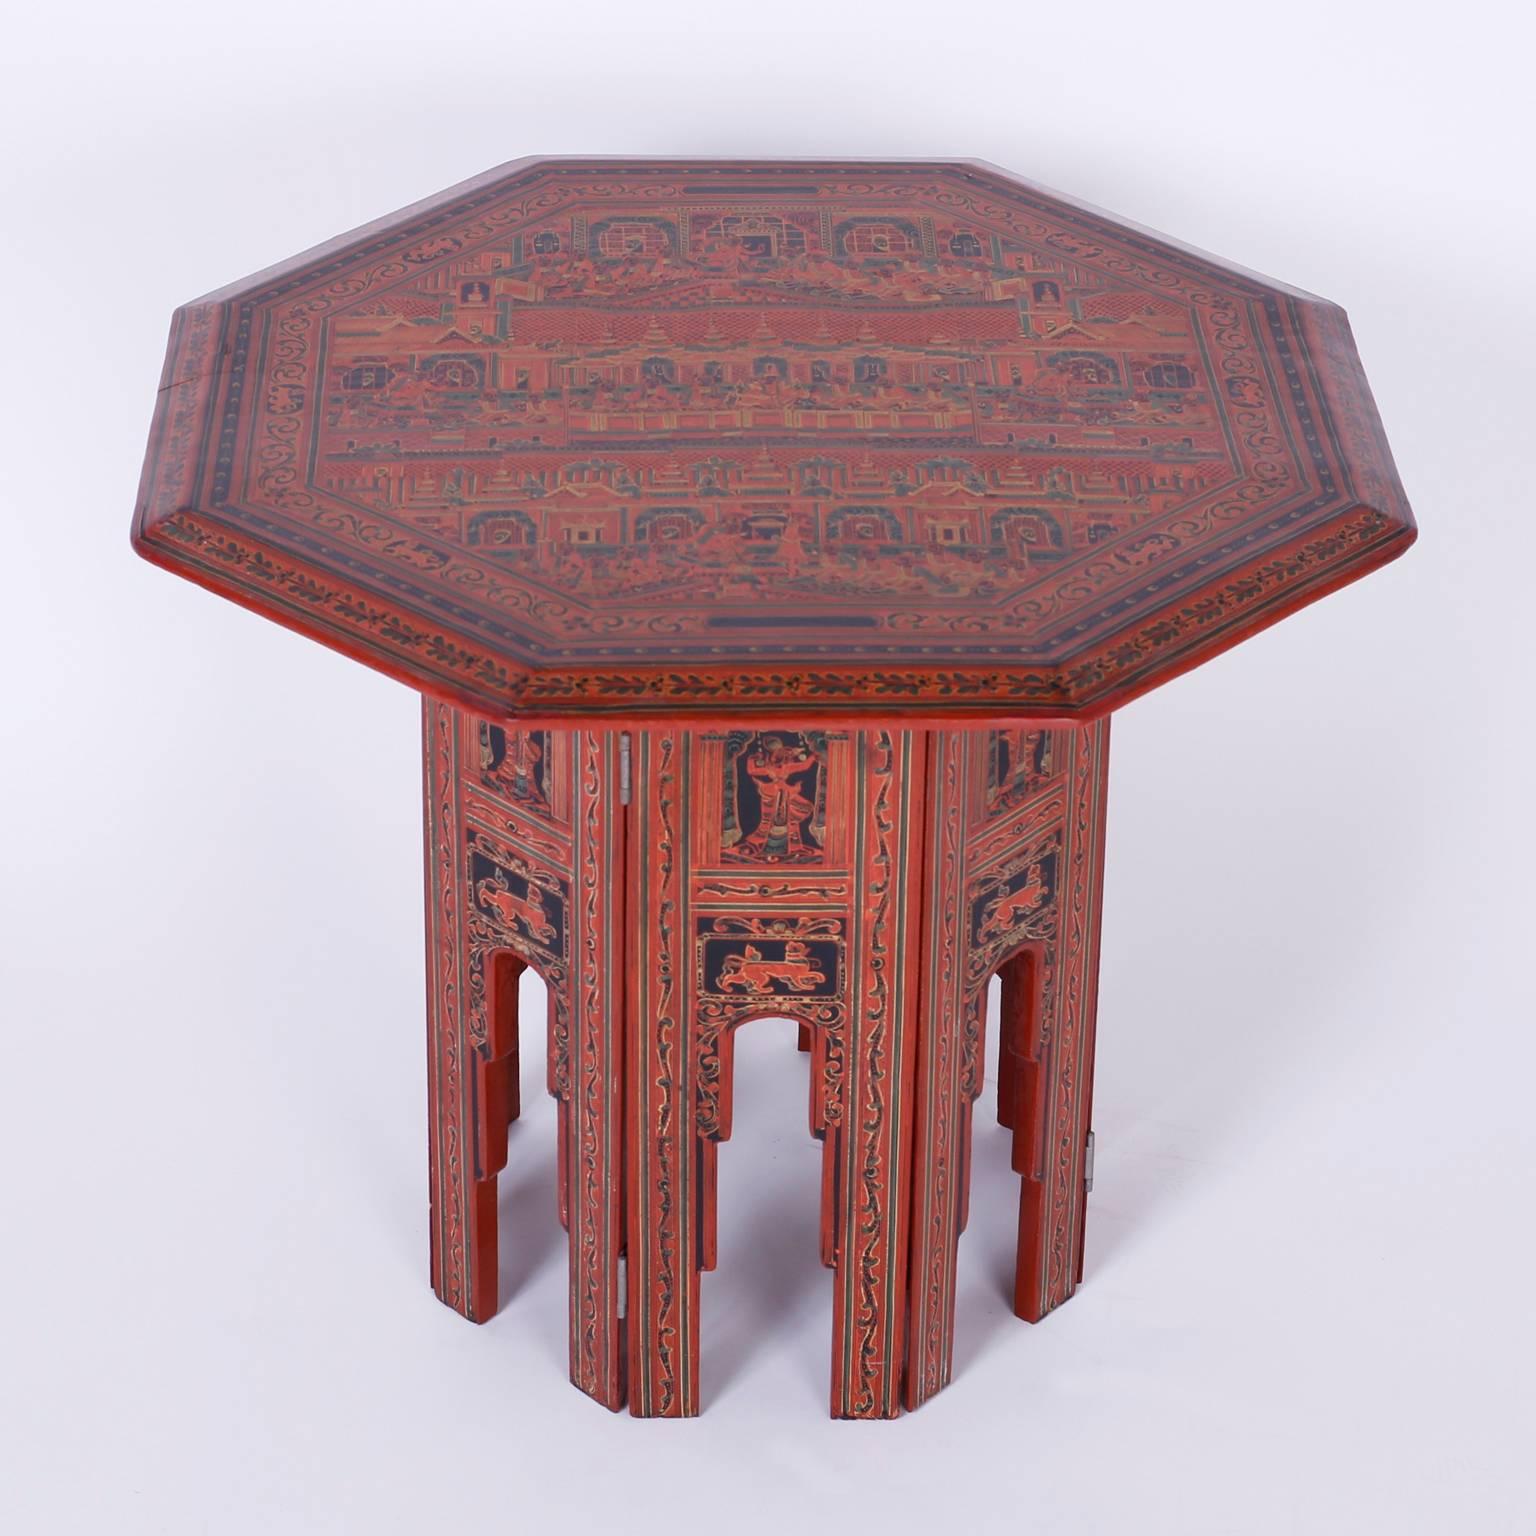 Exotic Thai table with an octagon top hand-painted with elaborate temple scenes and floral borders over a cinnabar colored background. The eight sided arched base is decorated all around with cats and flowers.